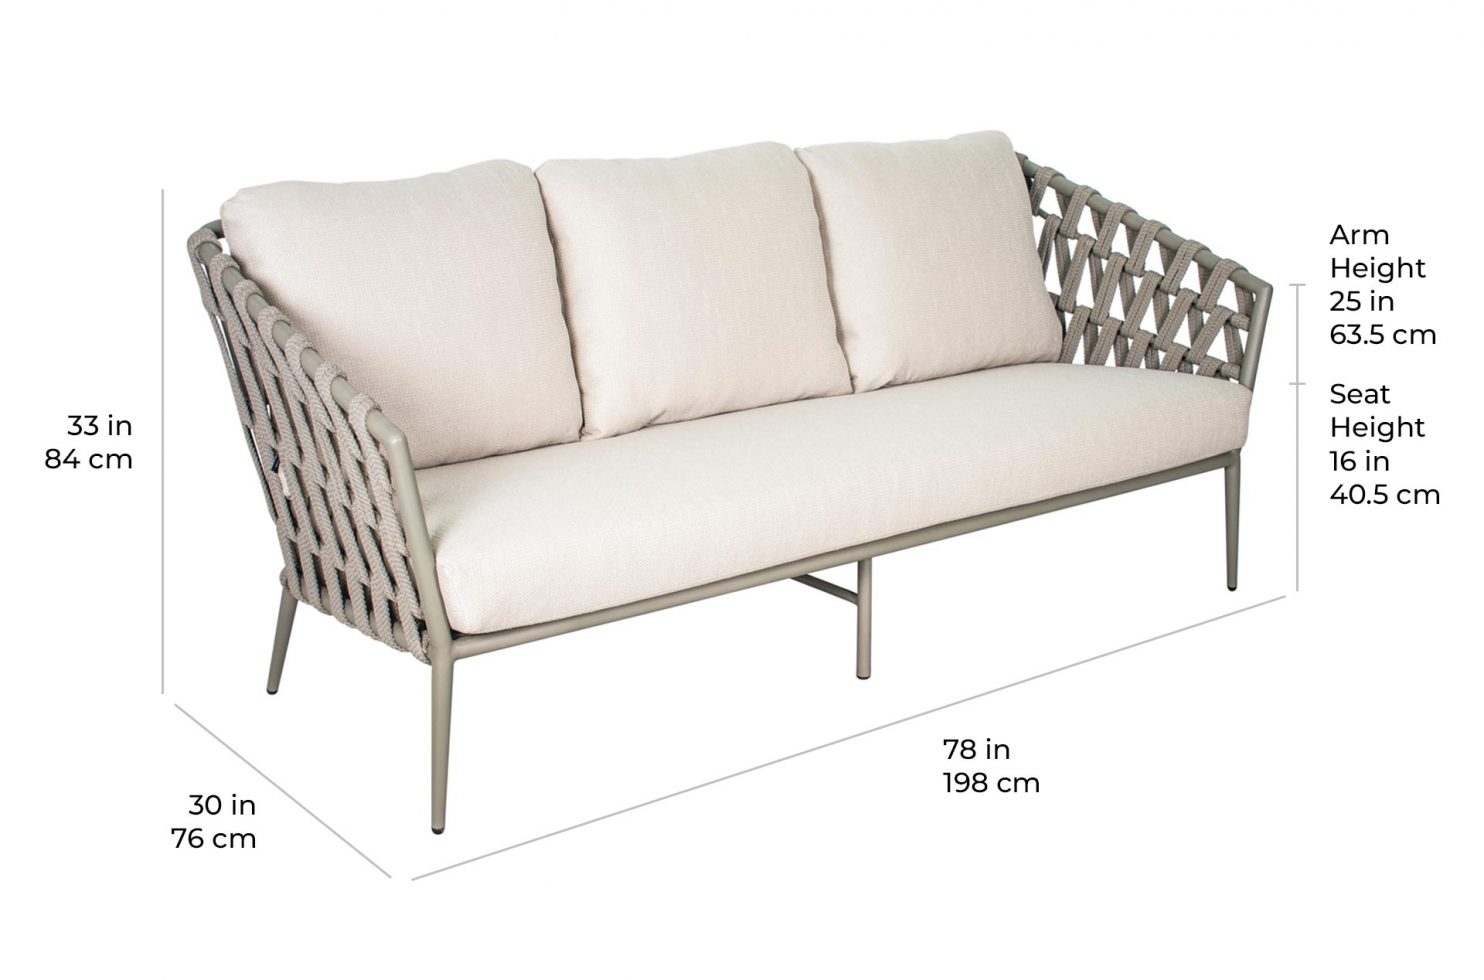 arch andaman sofa 620FT066P2 scale dims